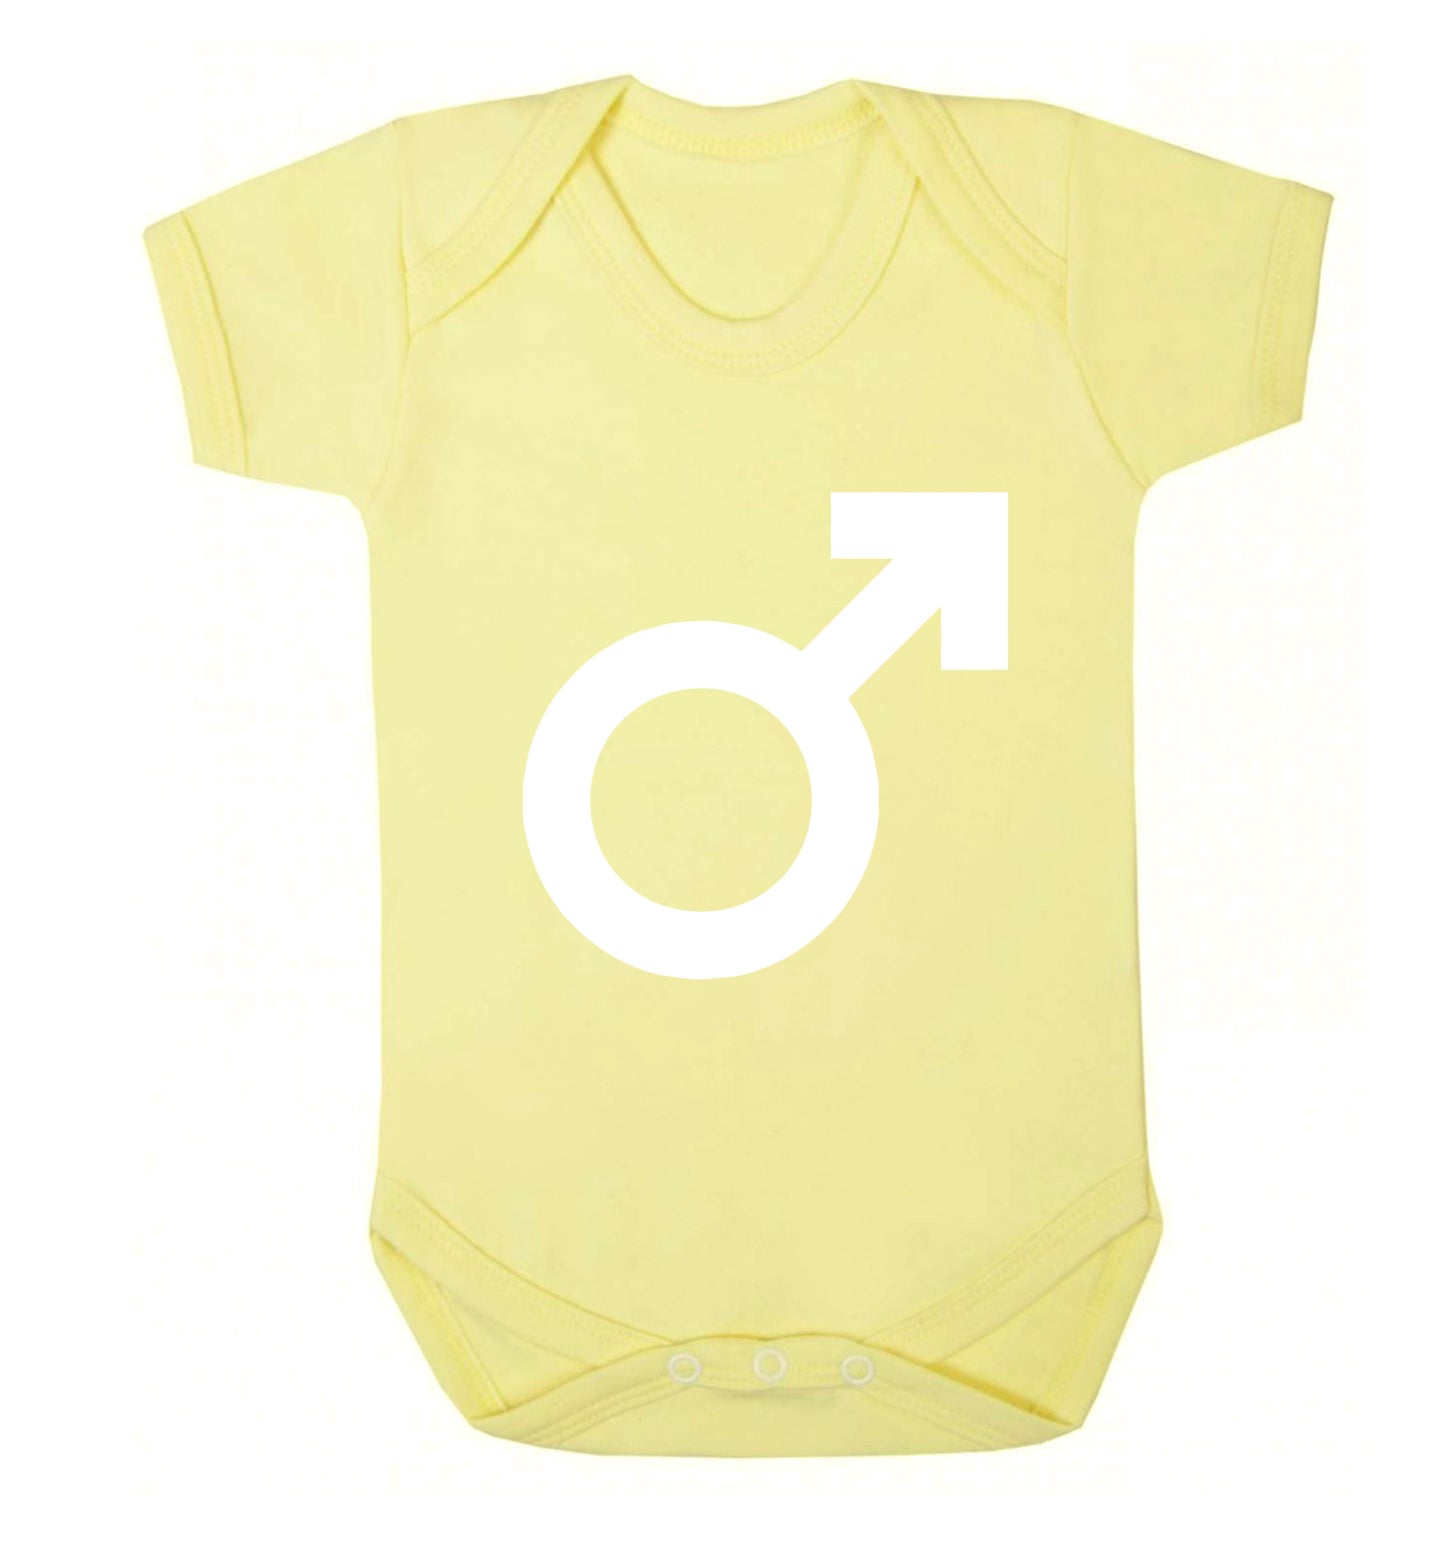 Male symbol large Baby Vest pale yellow 18-24 months